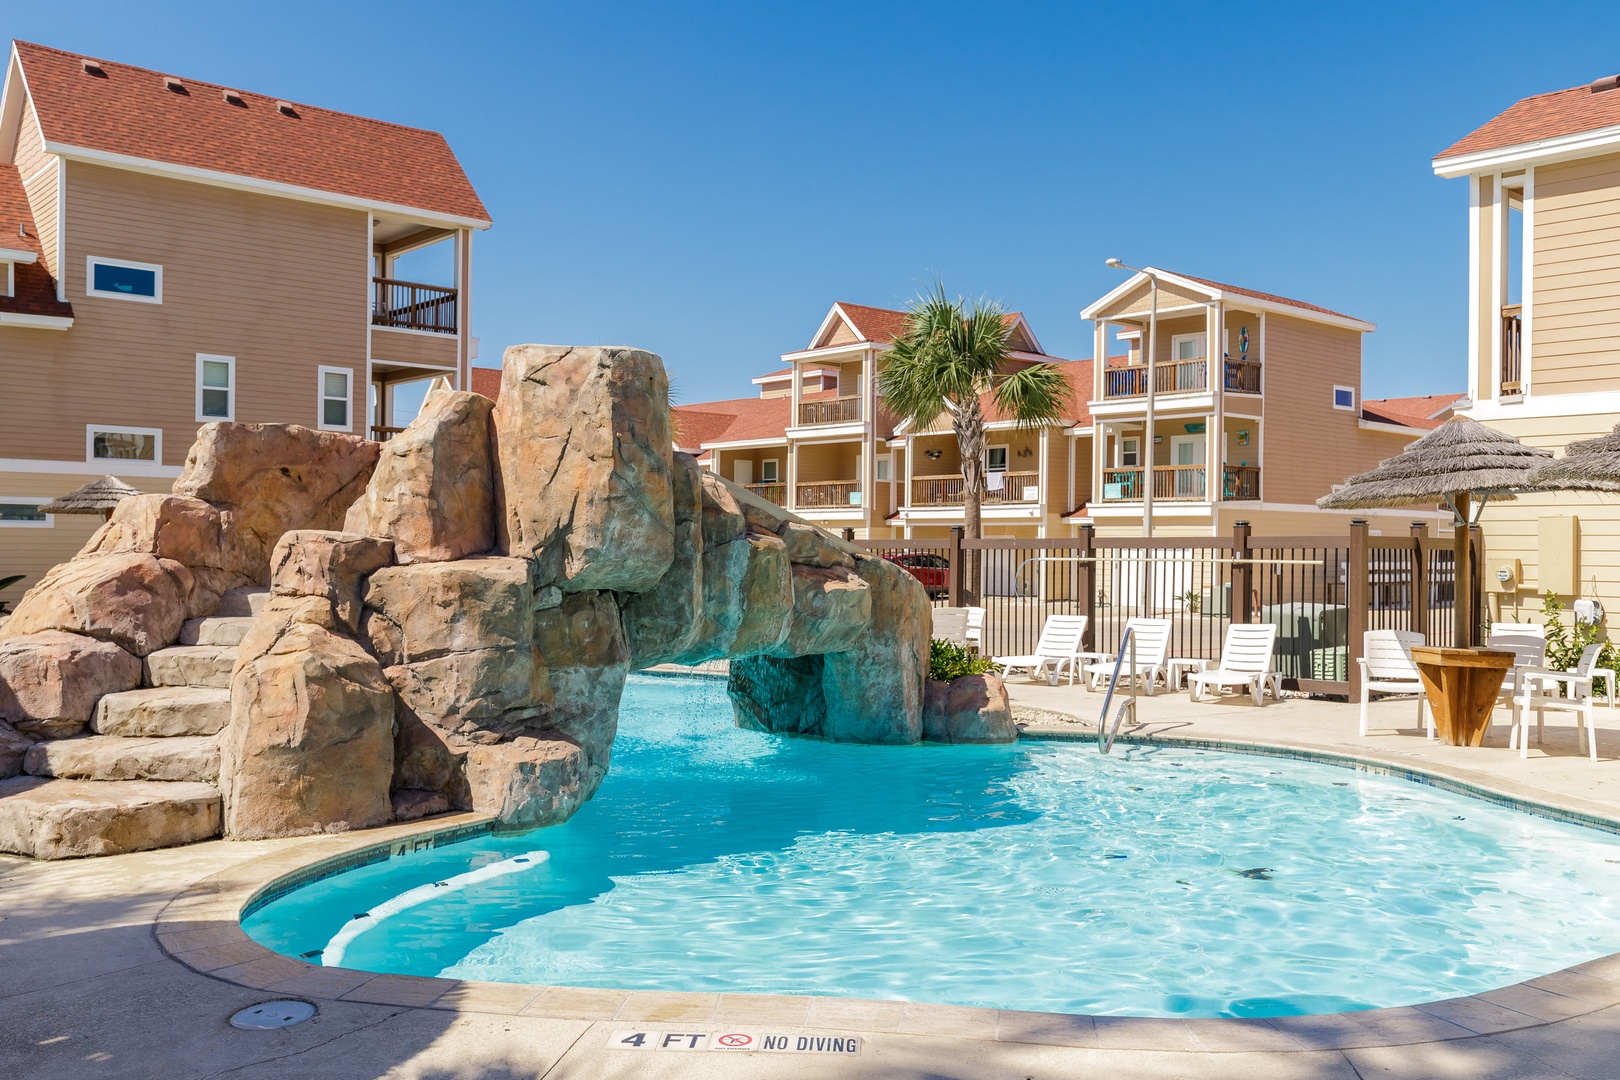 Lounge the day away or make a splash in the sparkling communal pool!